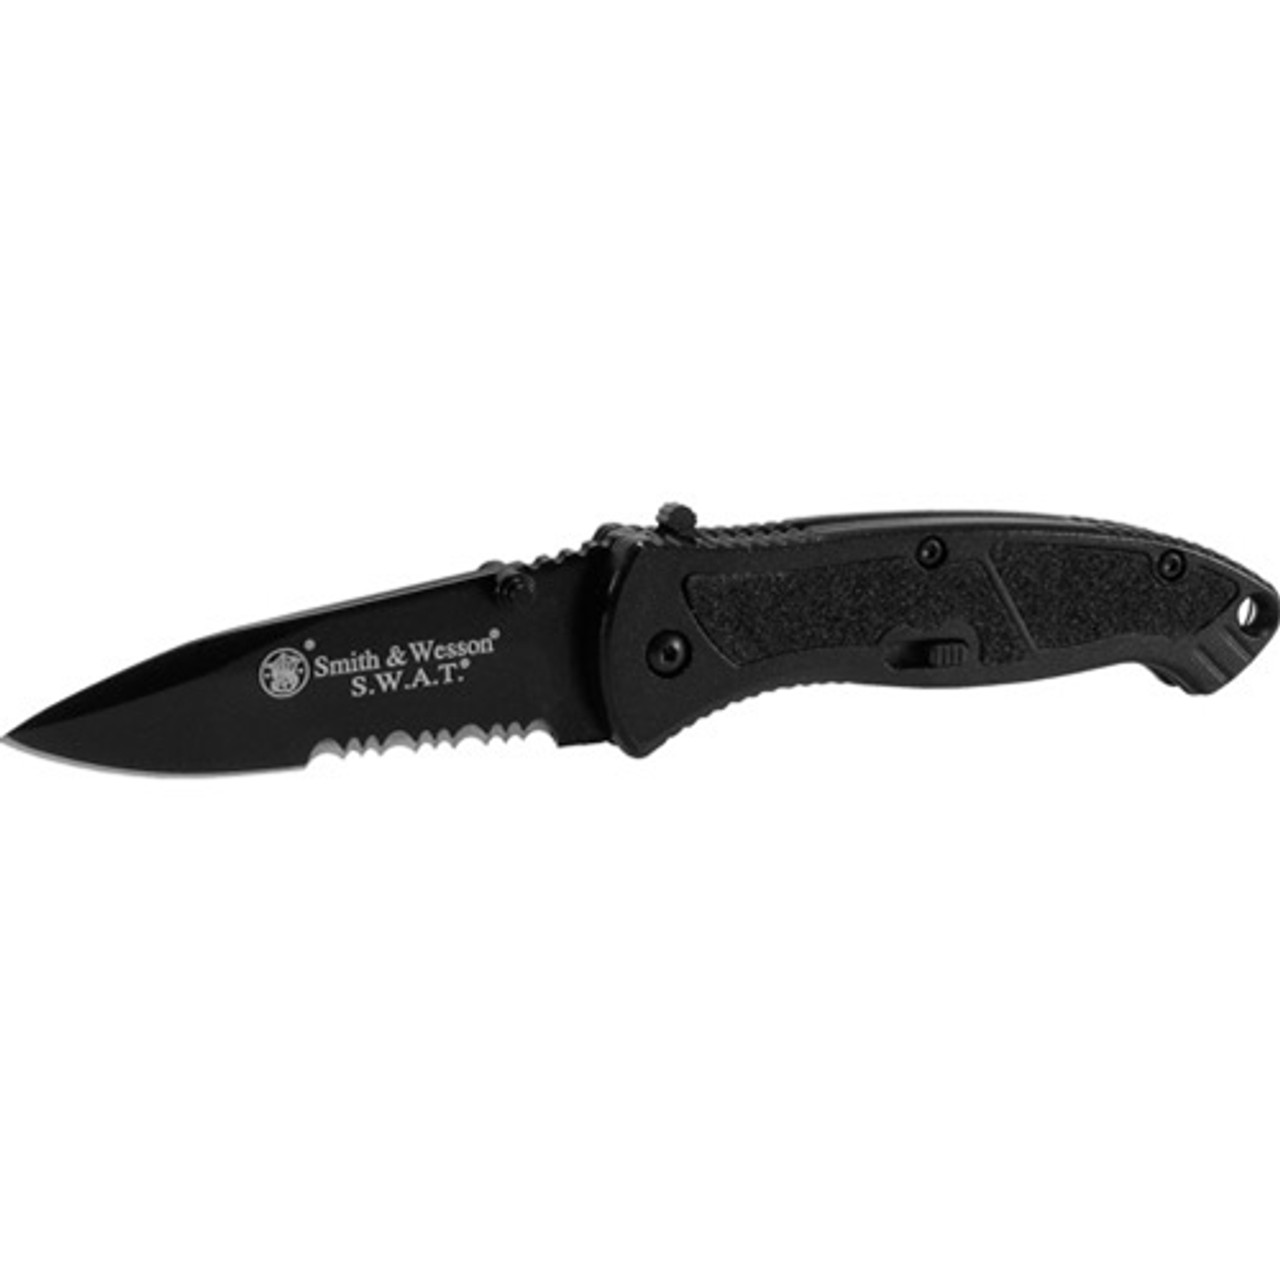 SMITH & WESSON MEDIUM SWAT ASSISTED OPENING KNIFE